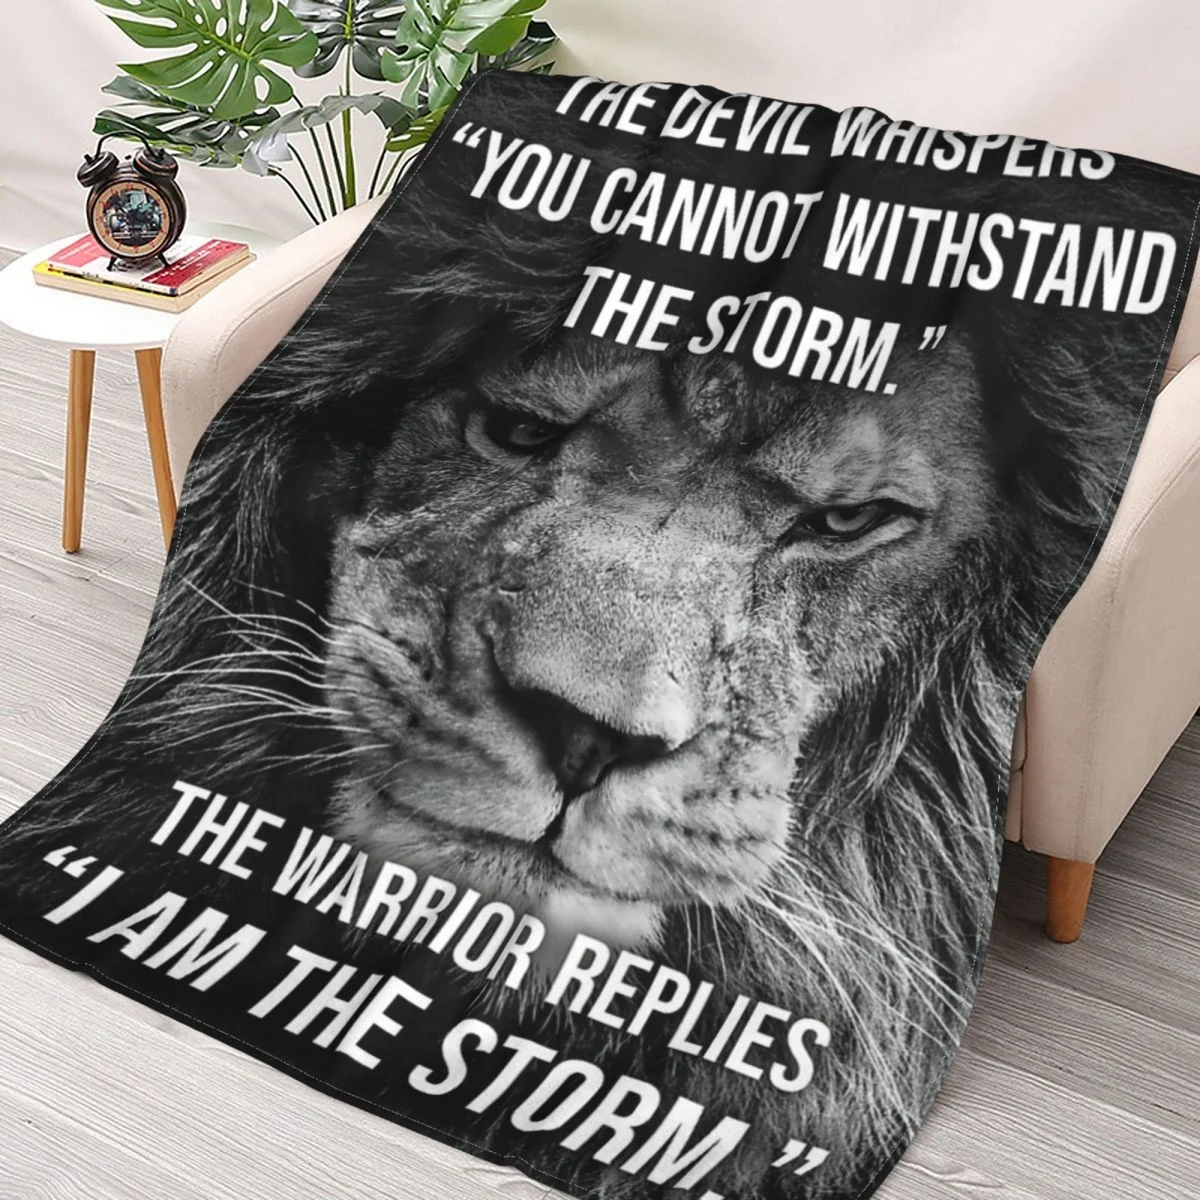 

I AM The Storm, Lion, Warrior - Motivational Throws Blankets Collage Flannel Ultra-Soft Warm picnic blanket bedspread on the bed